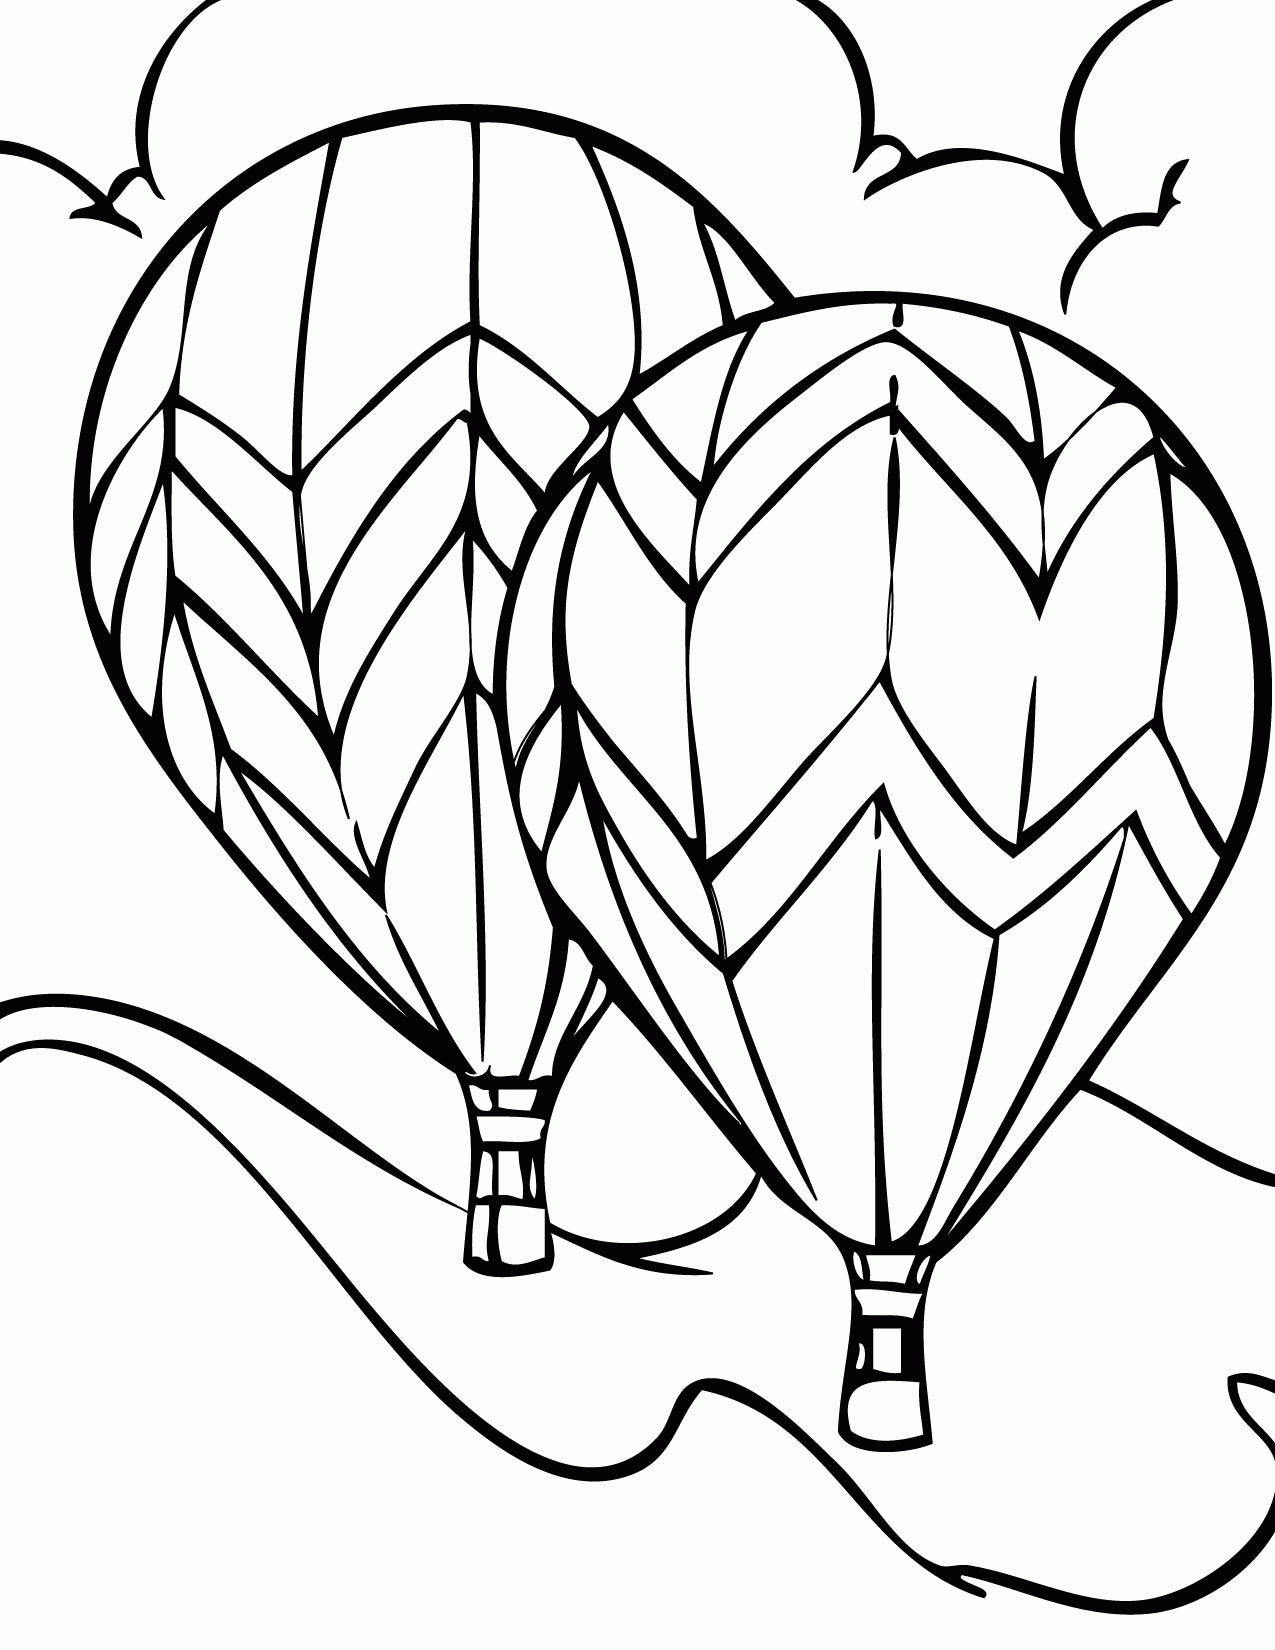 Transportation Coloring Pages - Handipoints